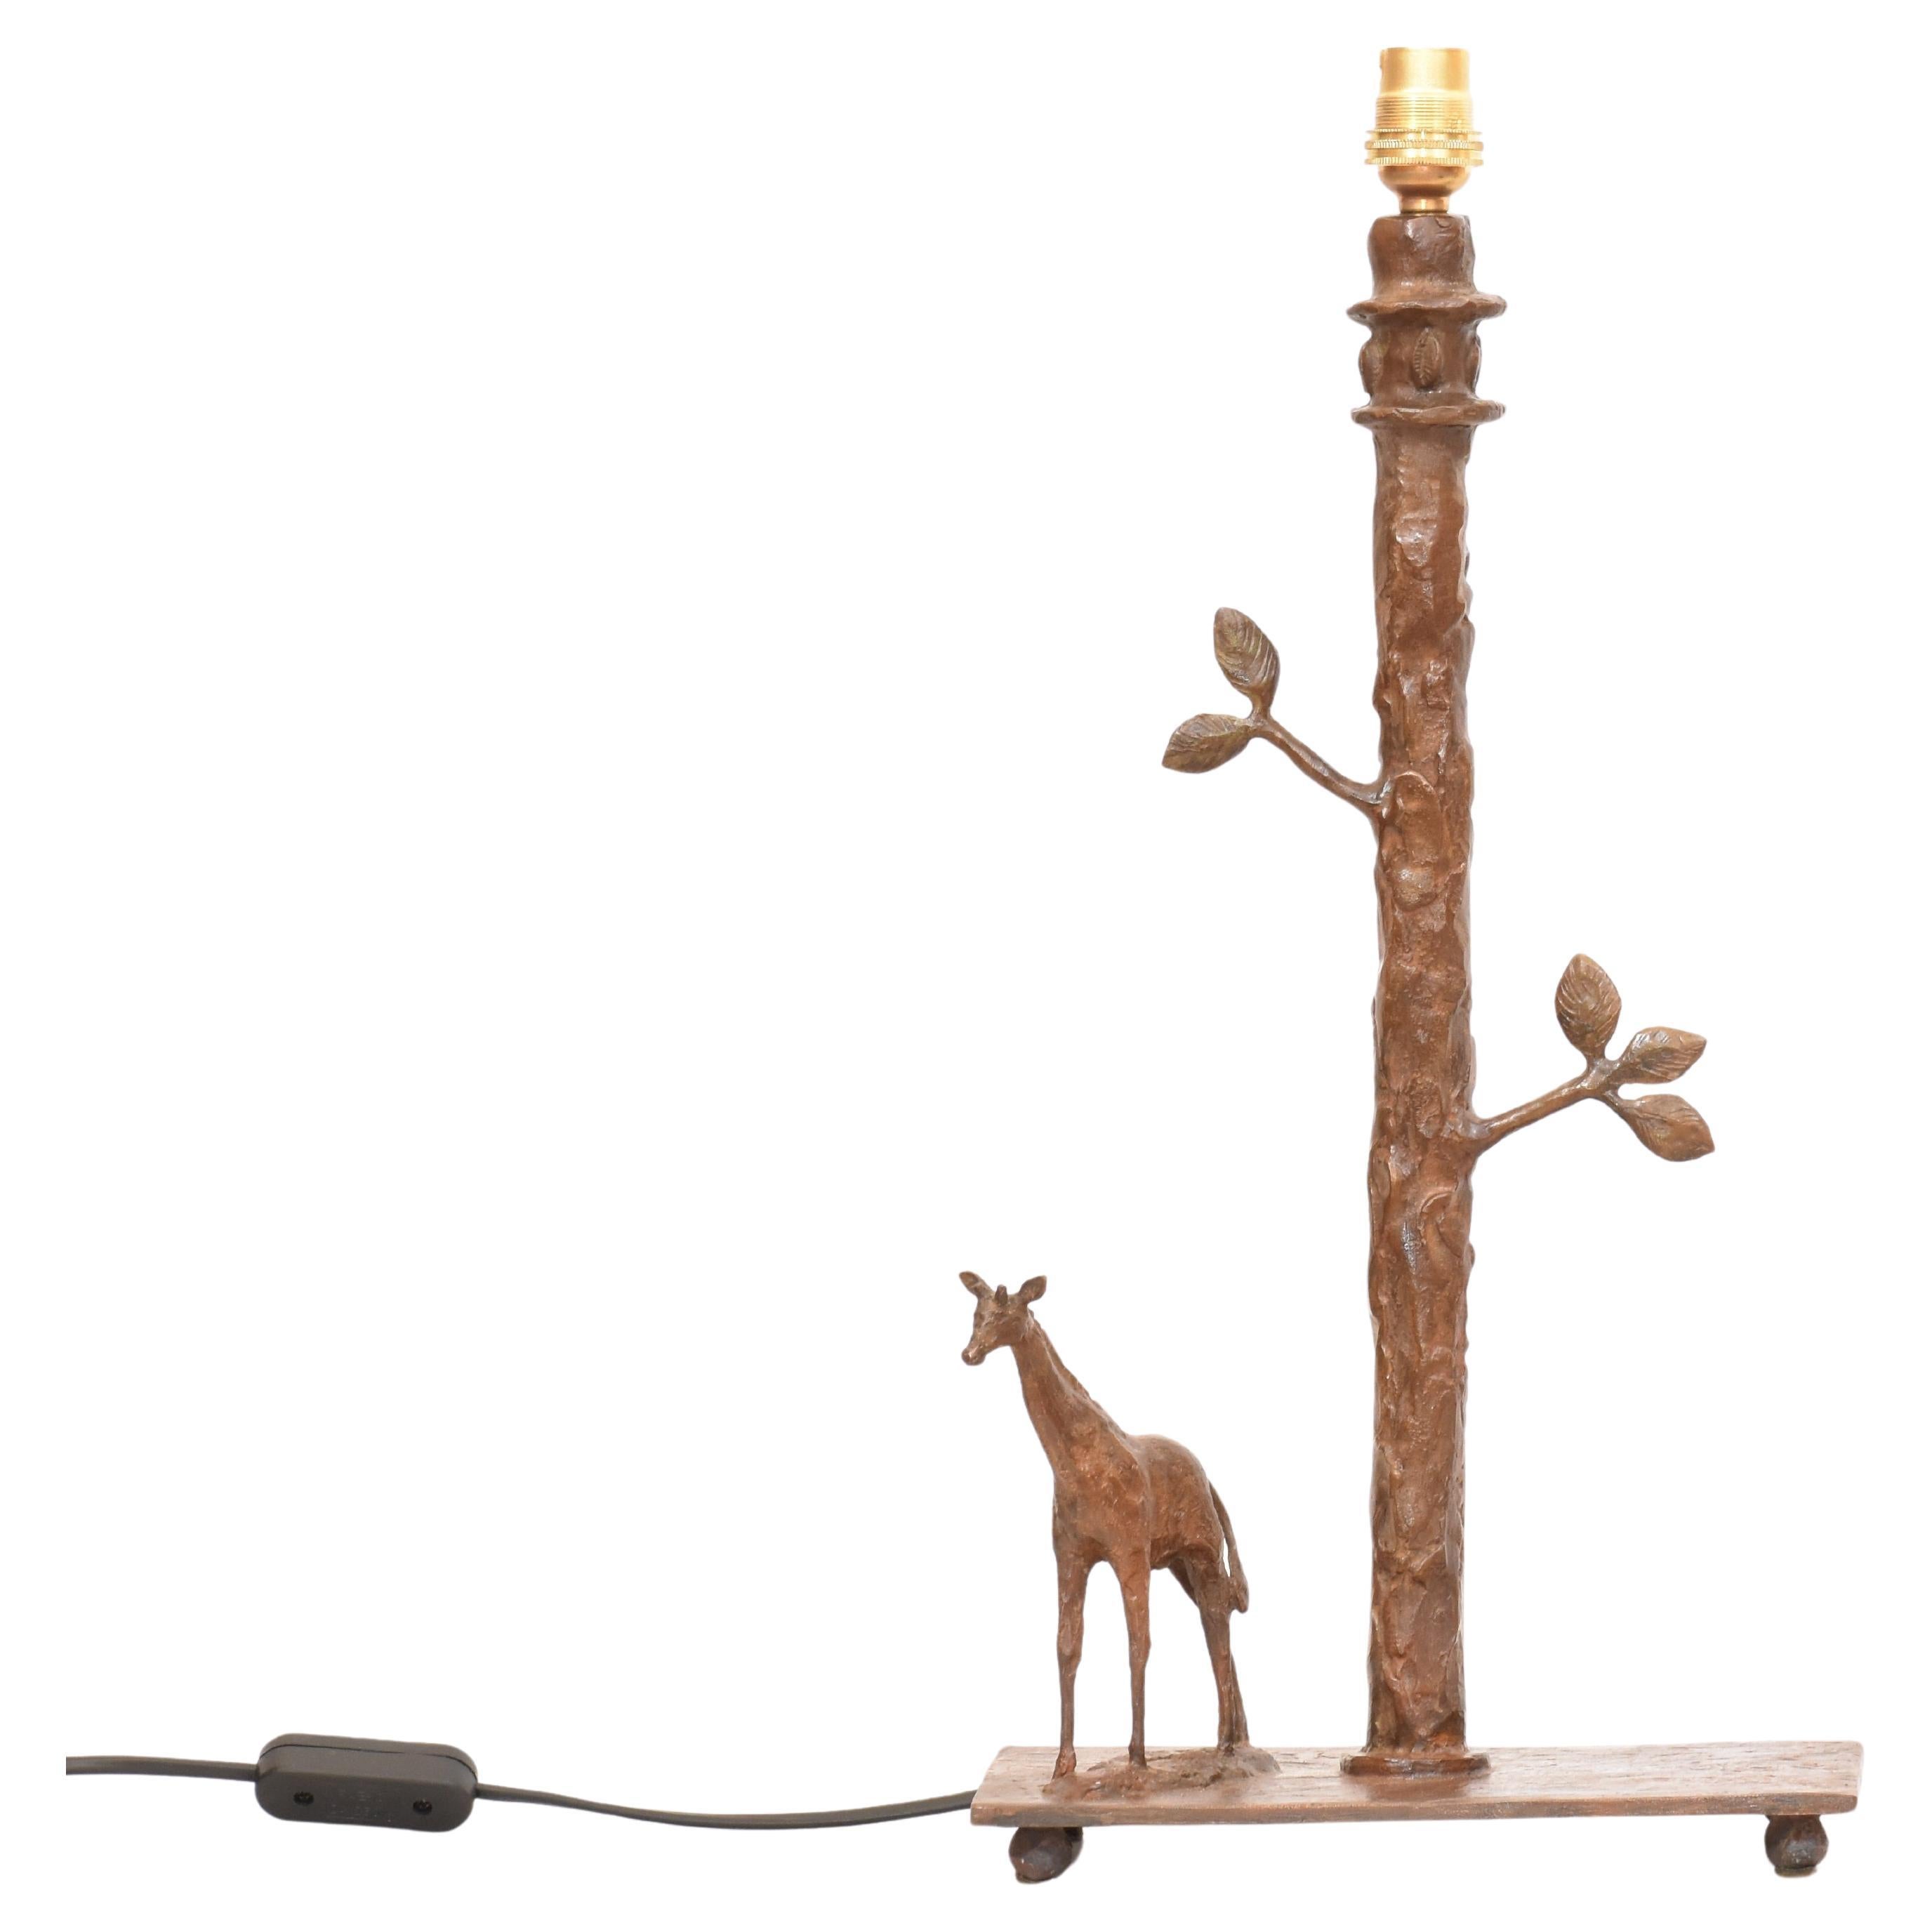 Handcrafted Sculptural Giraffe Table Lamp in cast bronze using the lost wax method. Handmade - sculpted, cast and finished individually by hand making each piece one of a king.

Height 41 cm (including brass light fitting, excluding lampshade), lamp